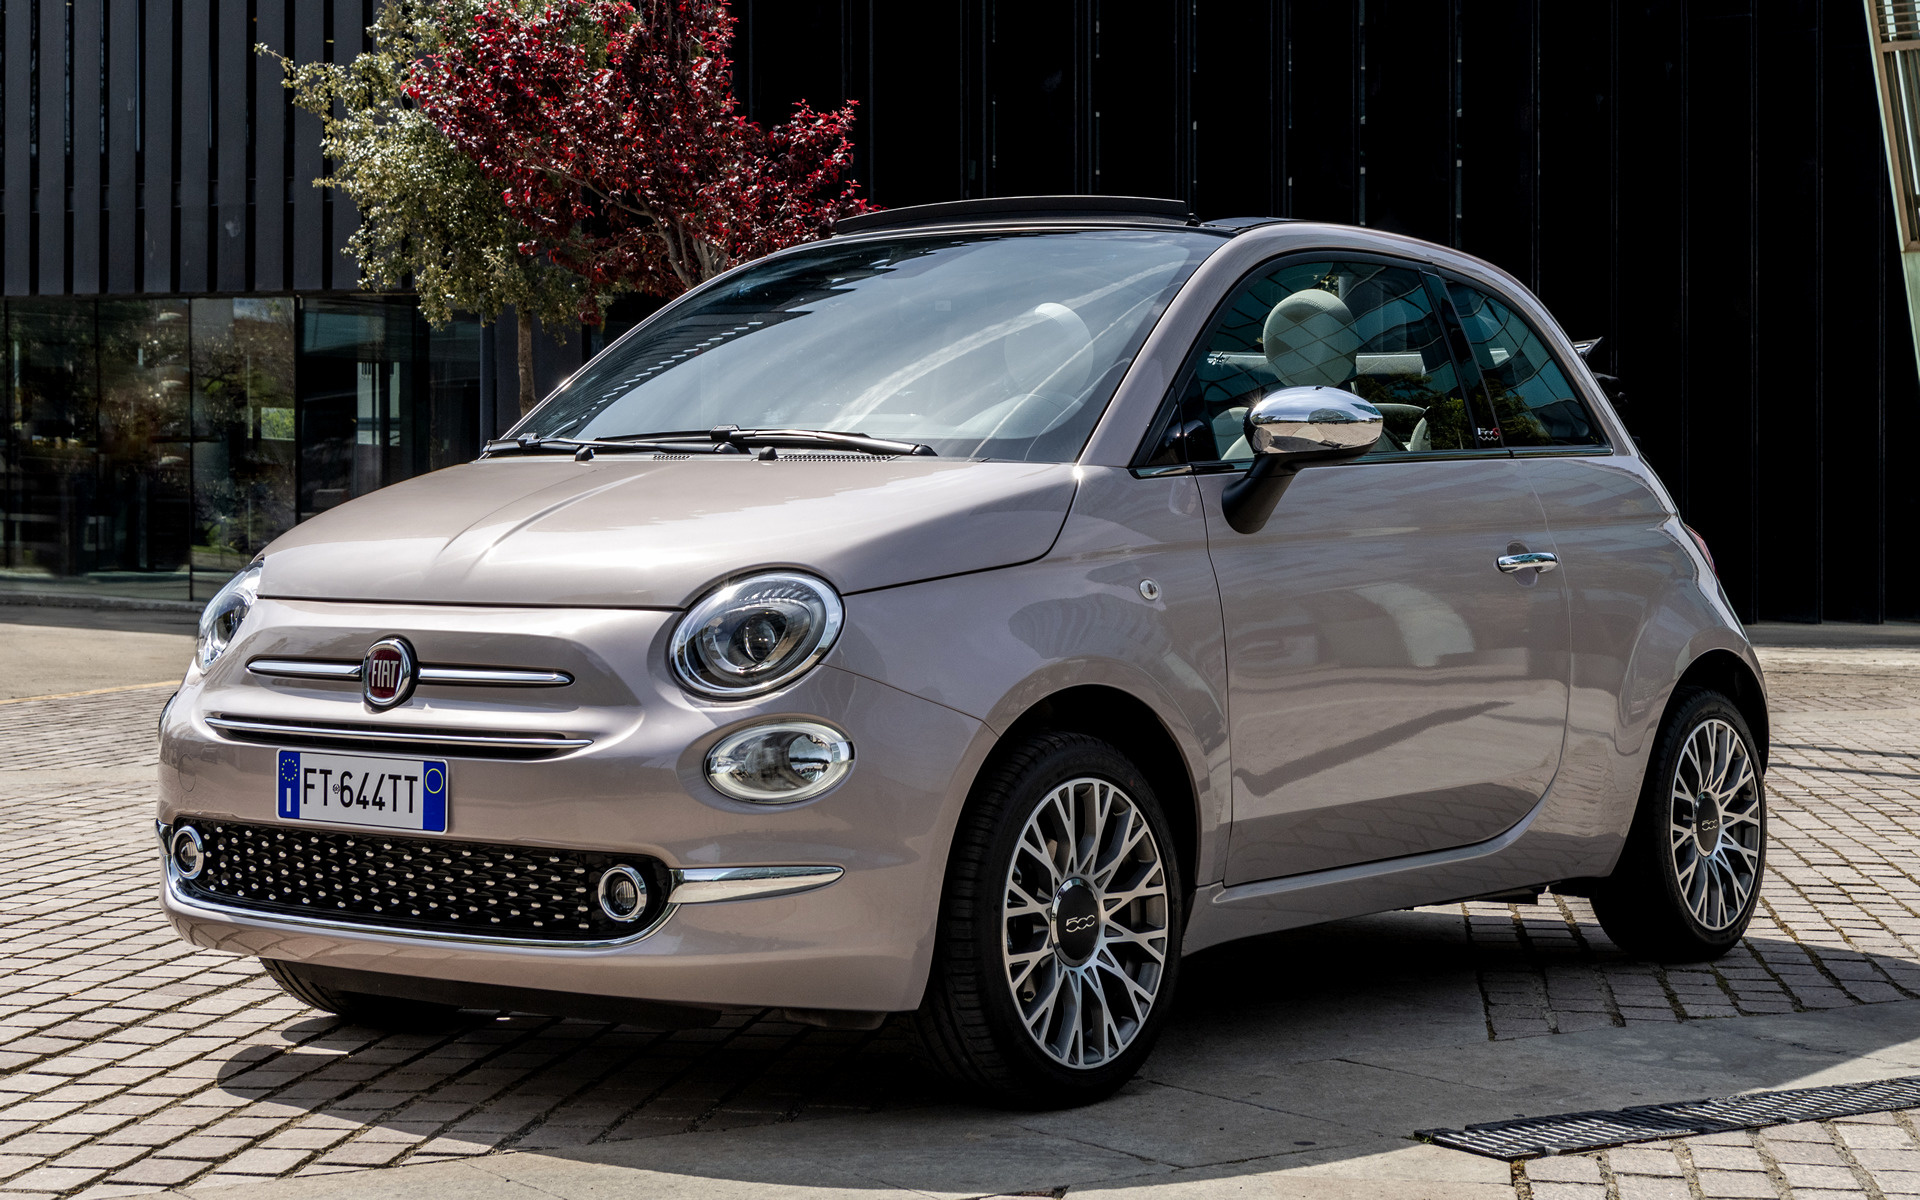 2019 Fiat 500C Star - Wallpapers and HD Images | Car Pixel